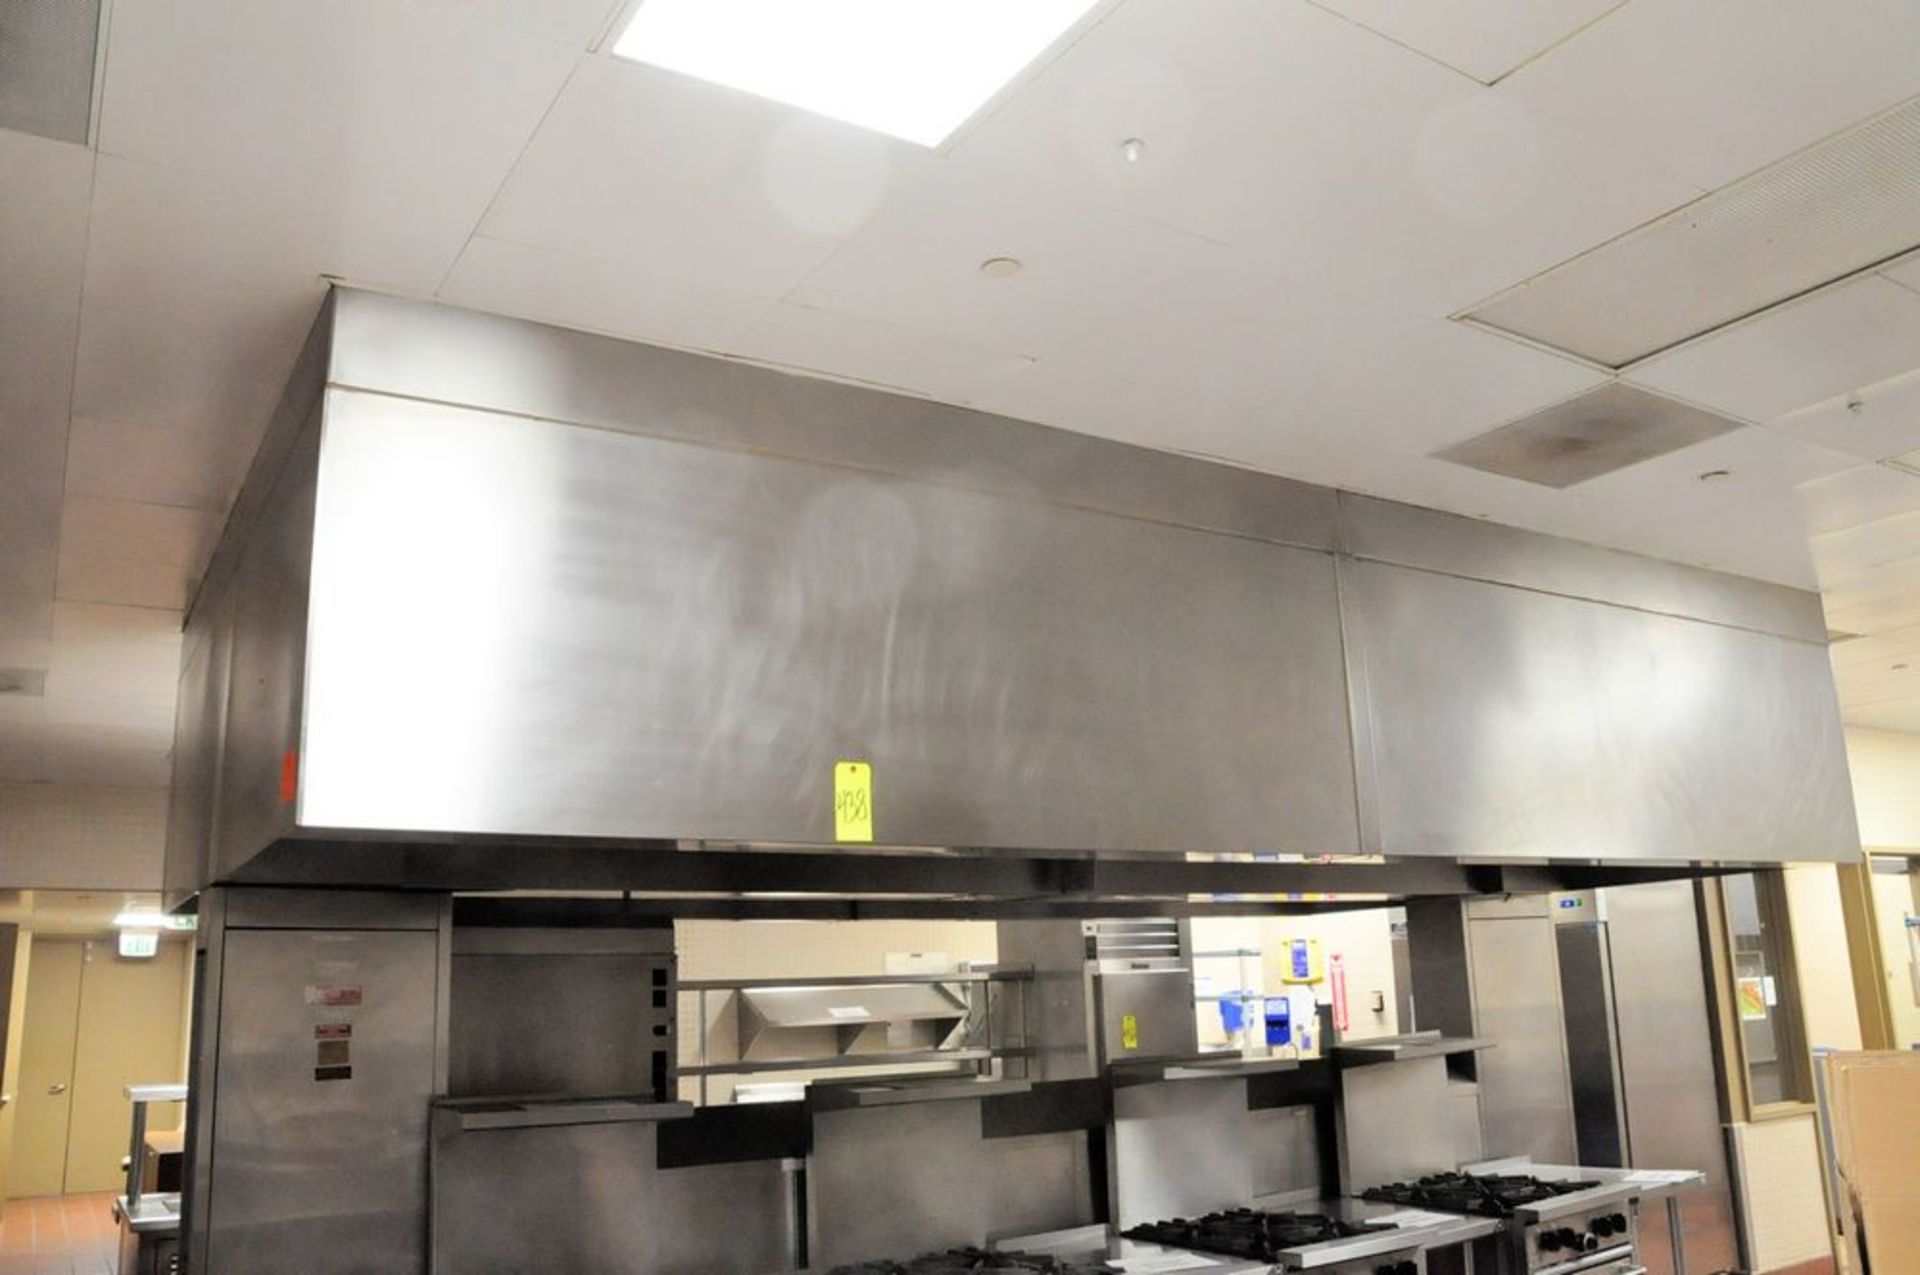 Stainless Steel 10' x 18' Exhaust Hood with Fire Suppression, (Main Kitchen Area-Back Kitchen), (1st